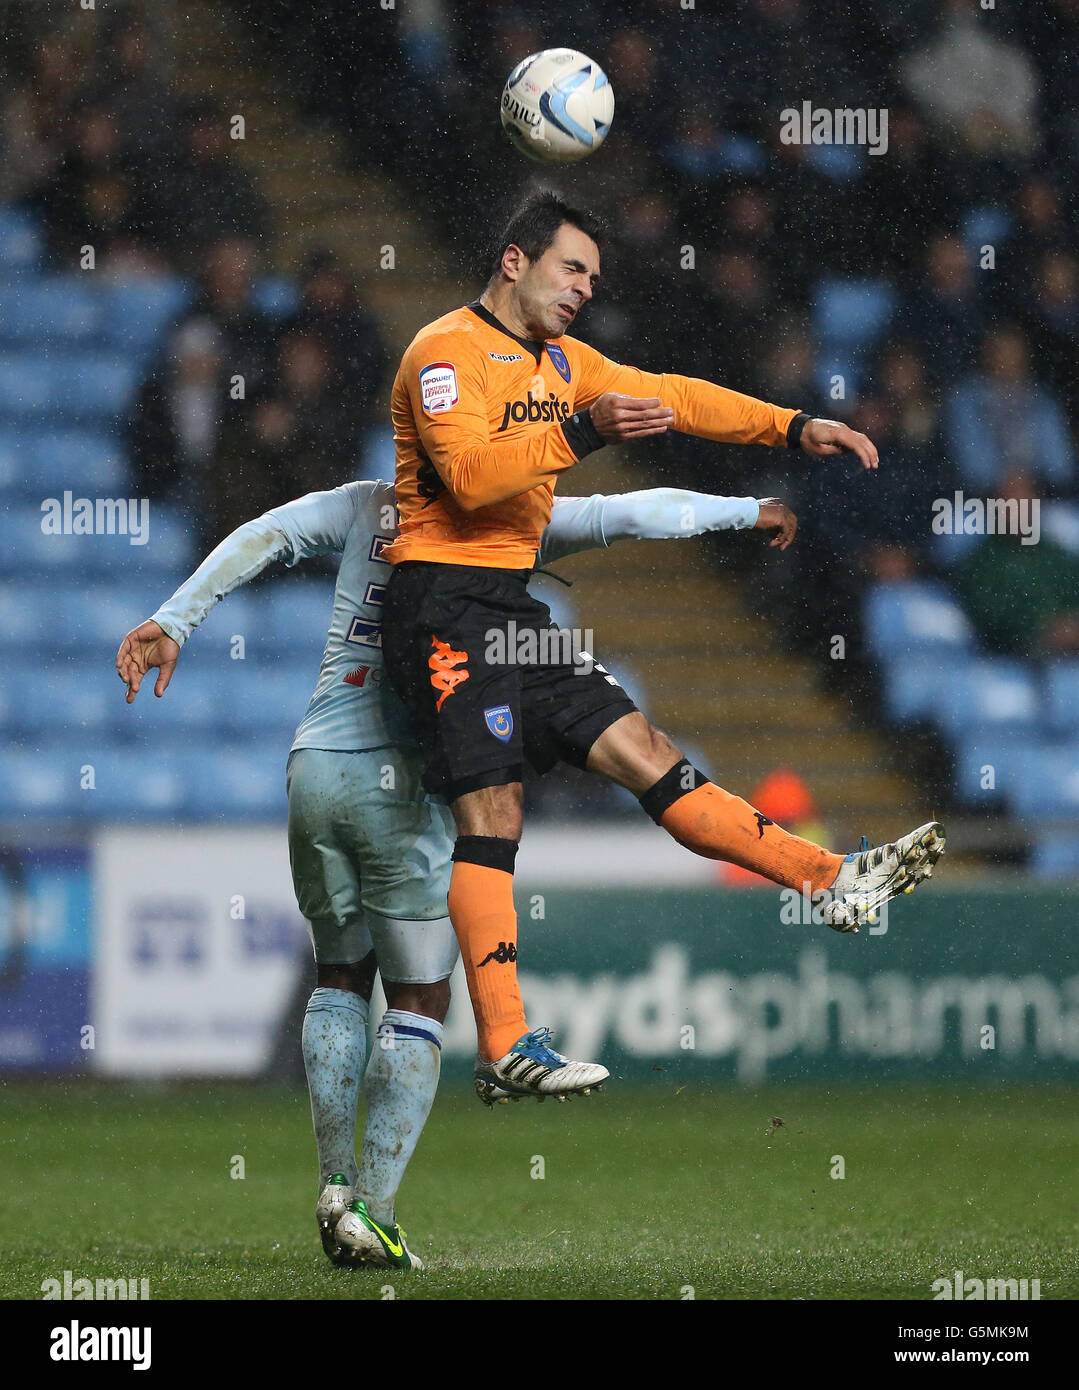 Coventry City's James Bailey and Portsmouth's Ricardo Rocha jump for the ball during the npower Football League One match at the Ricoh Arena, Coventry. Stock Photo